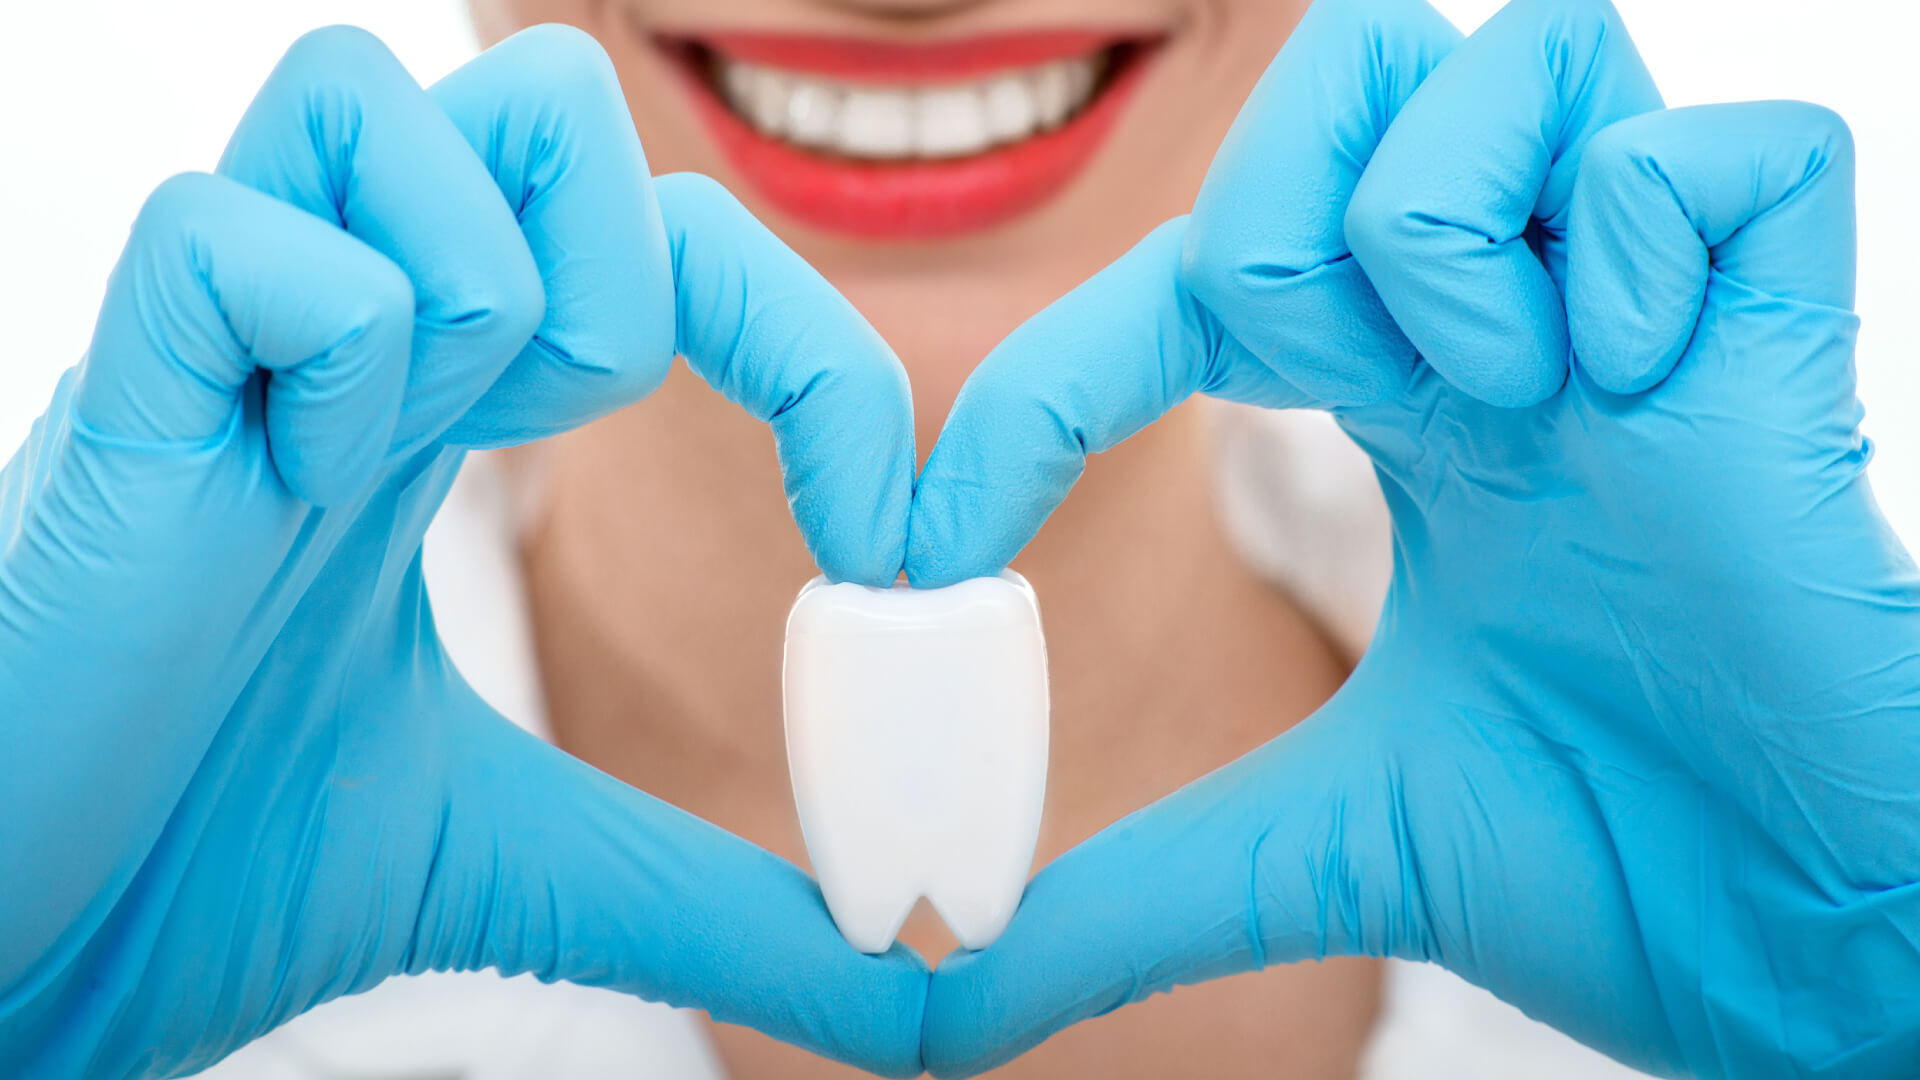 Featured image for “Why Oral Health is Essential for Overall Health”